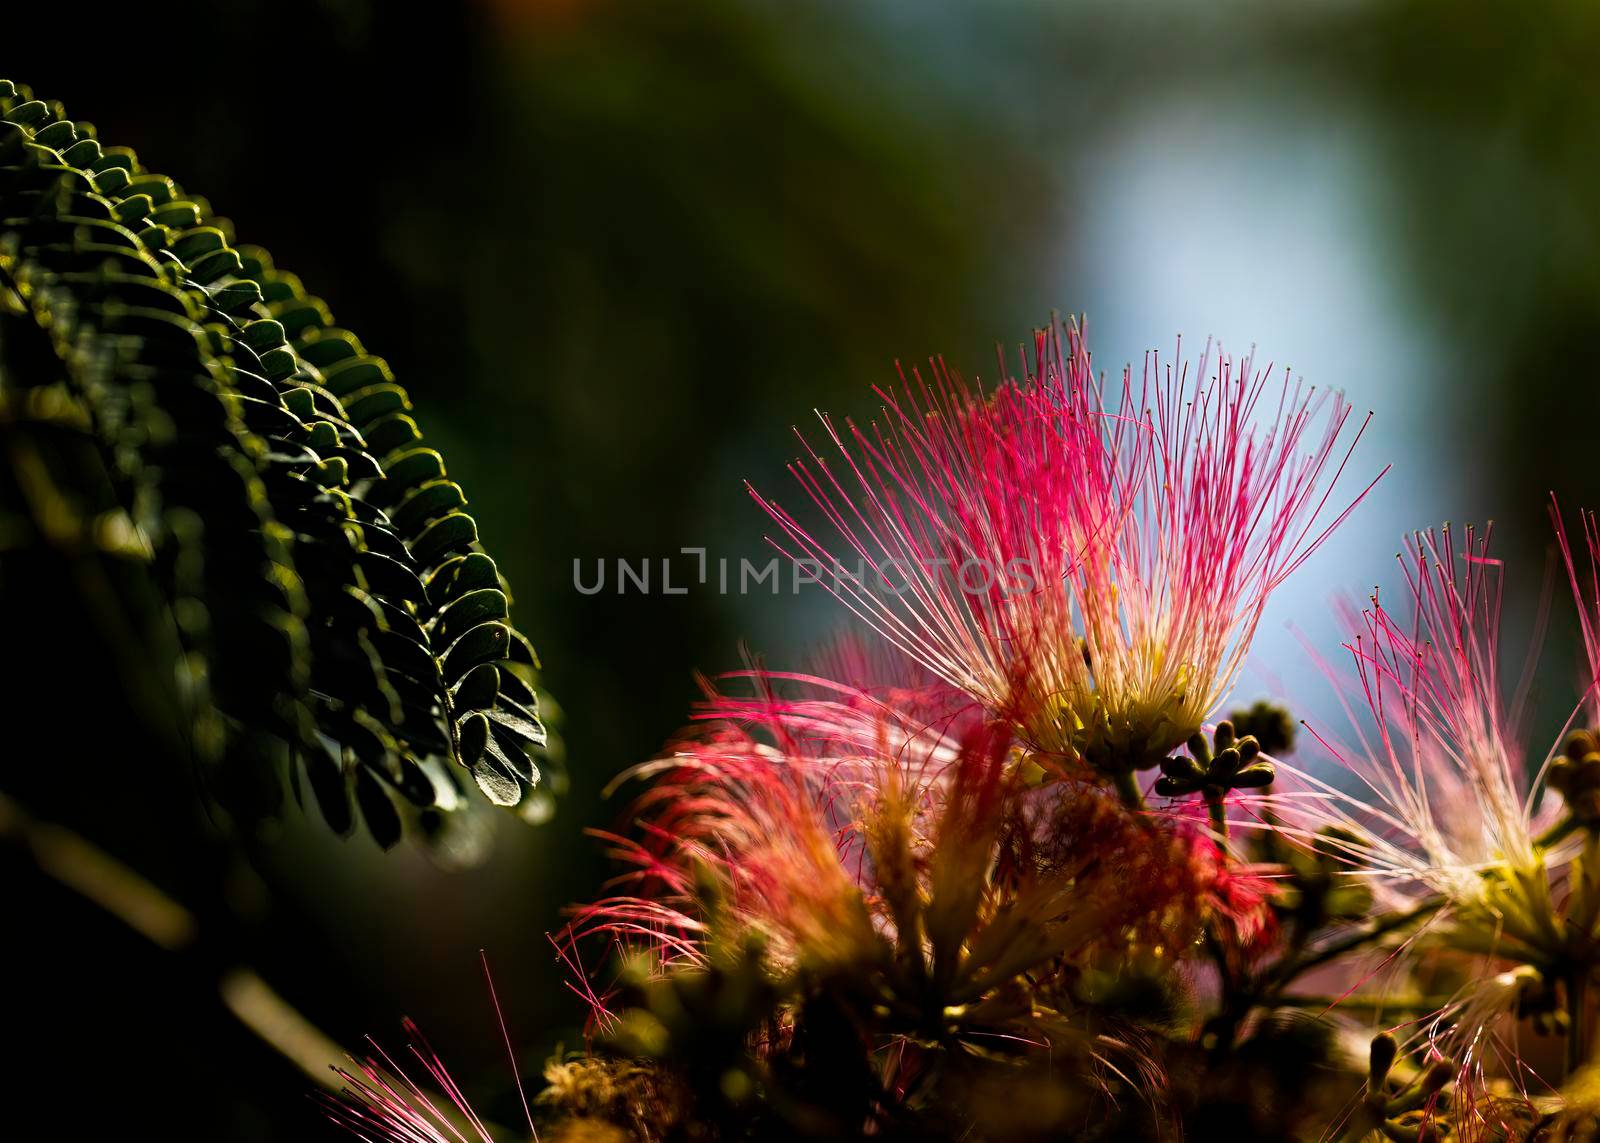 Backlit Mimosa Blooms and Leaves by CharlieFloyd